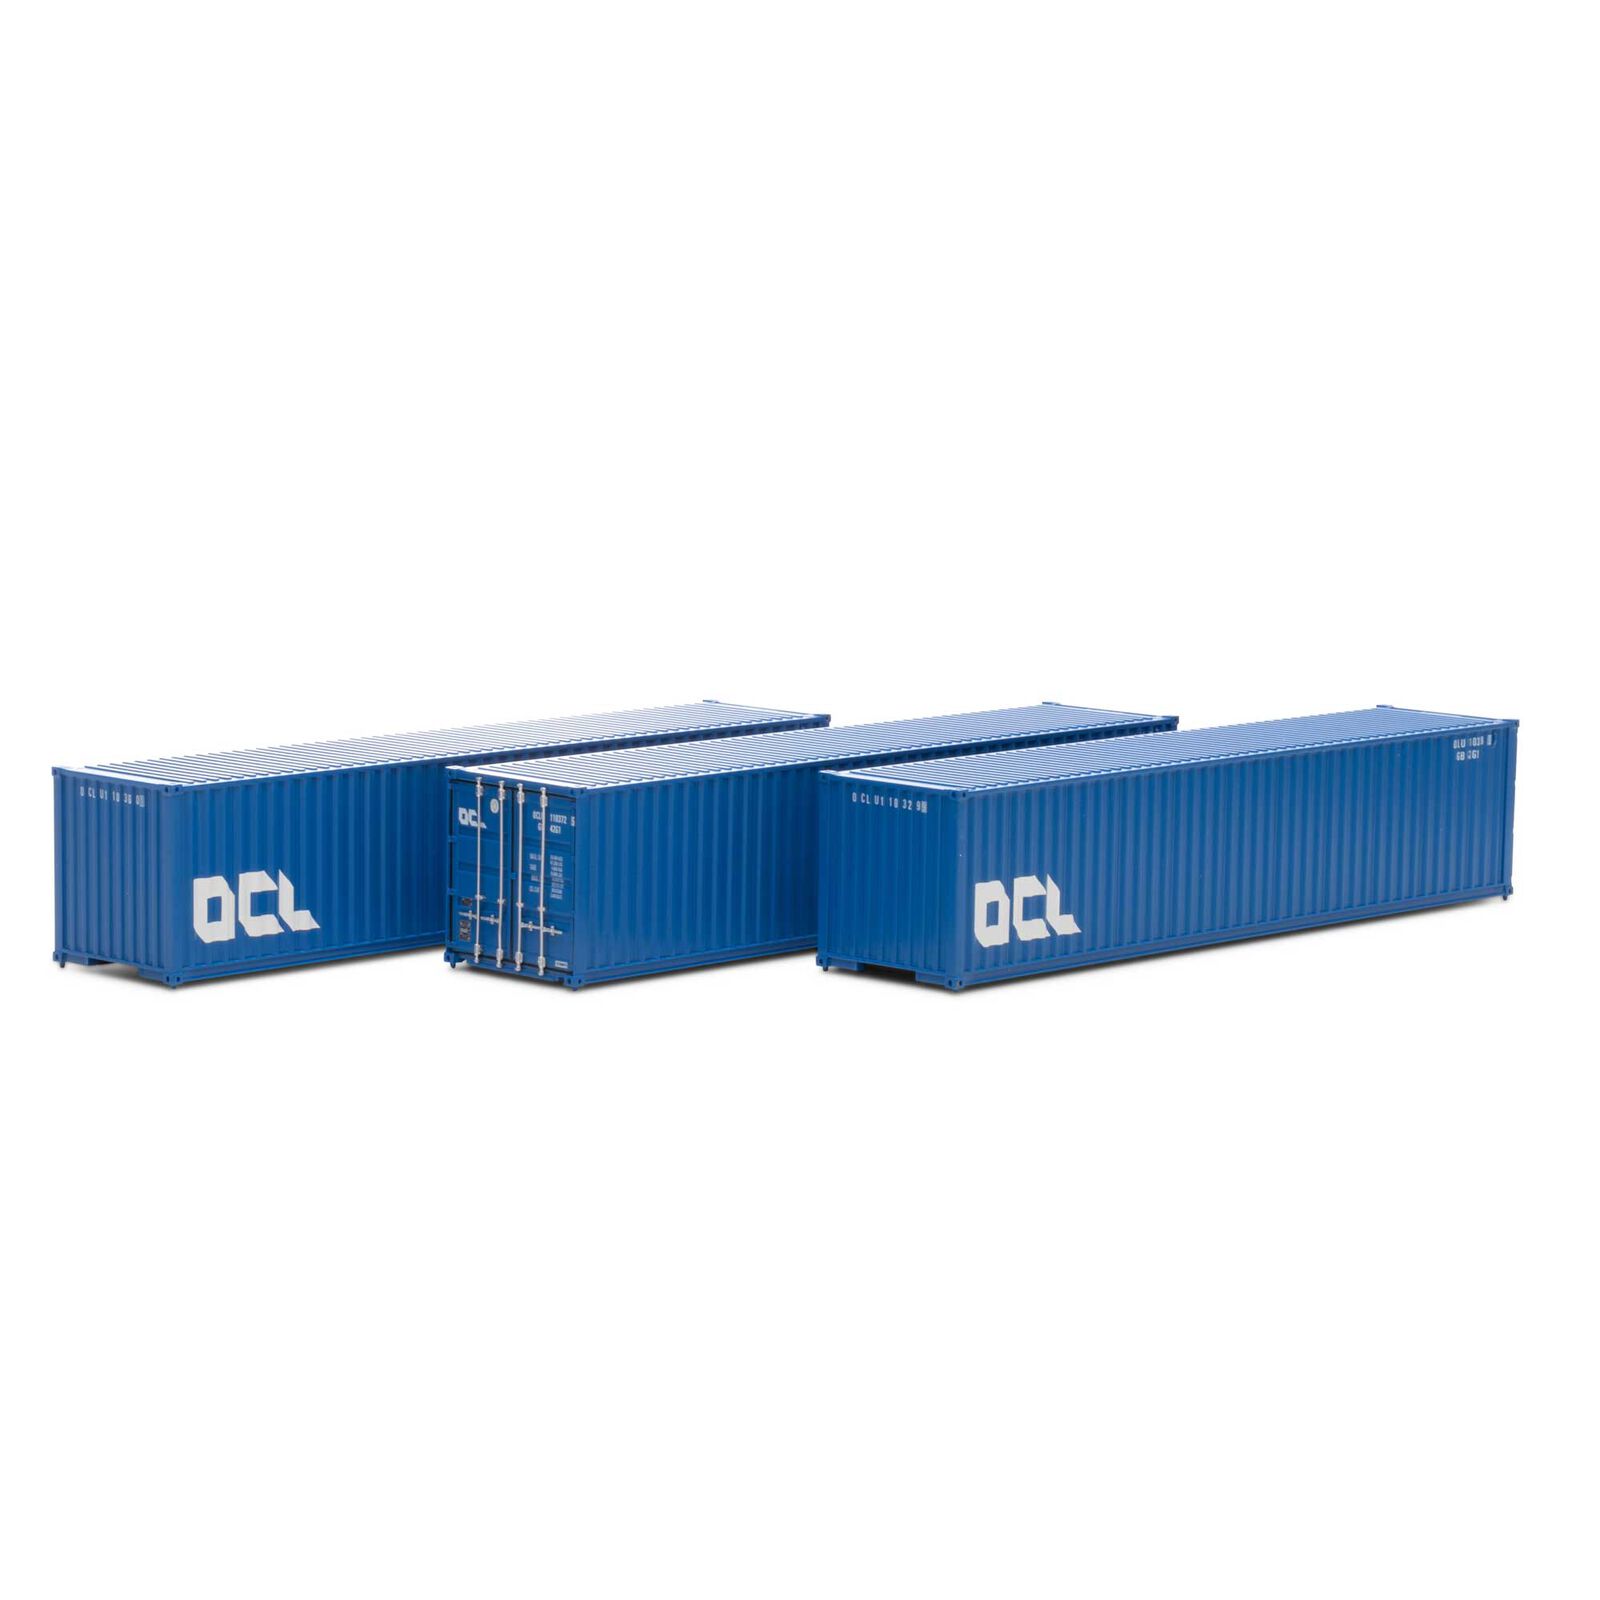 Athearn RTR 27057 - HO 40ft Corrugated LC Container - OCL #1 (3pk)